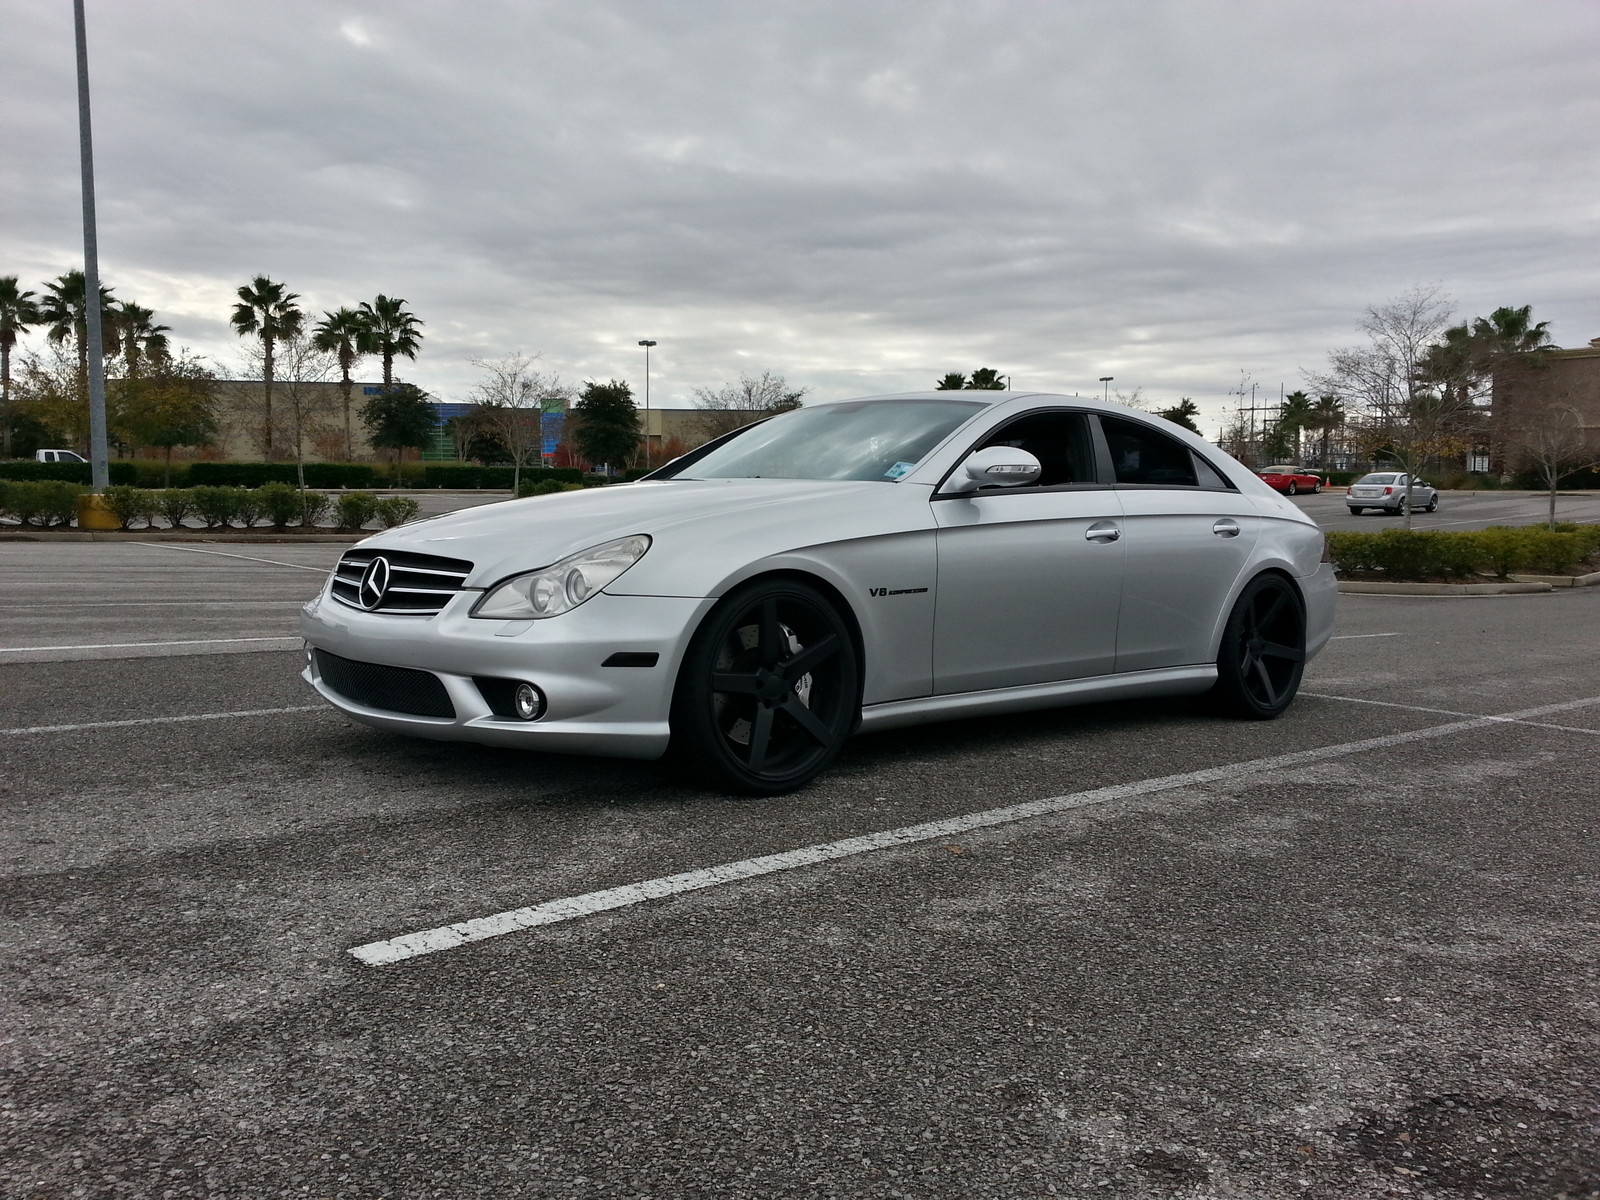 2006 silver Mercedes-Benz CLS55 AMG  picture, mods, upgrades